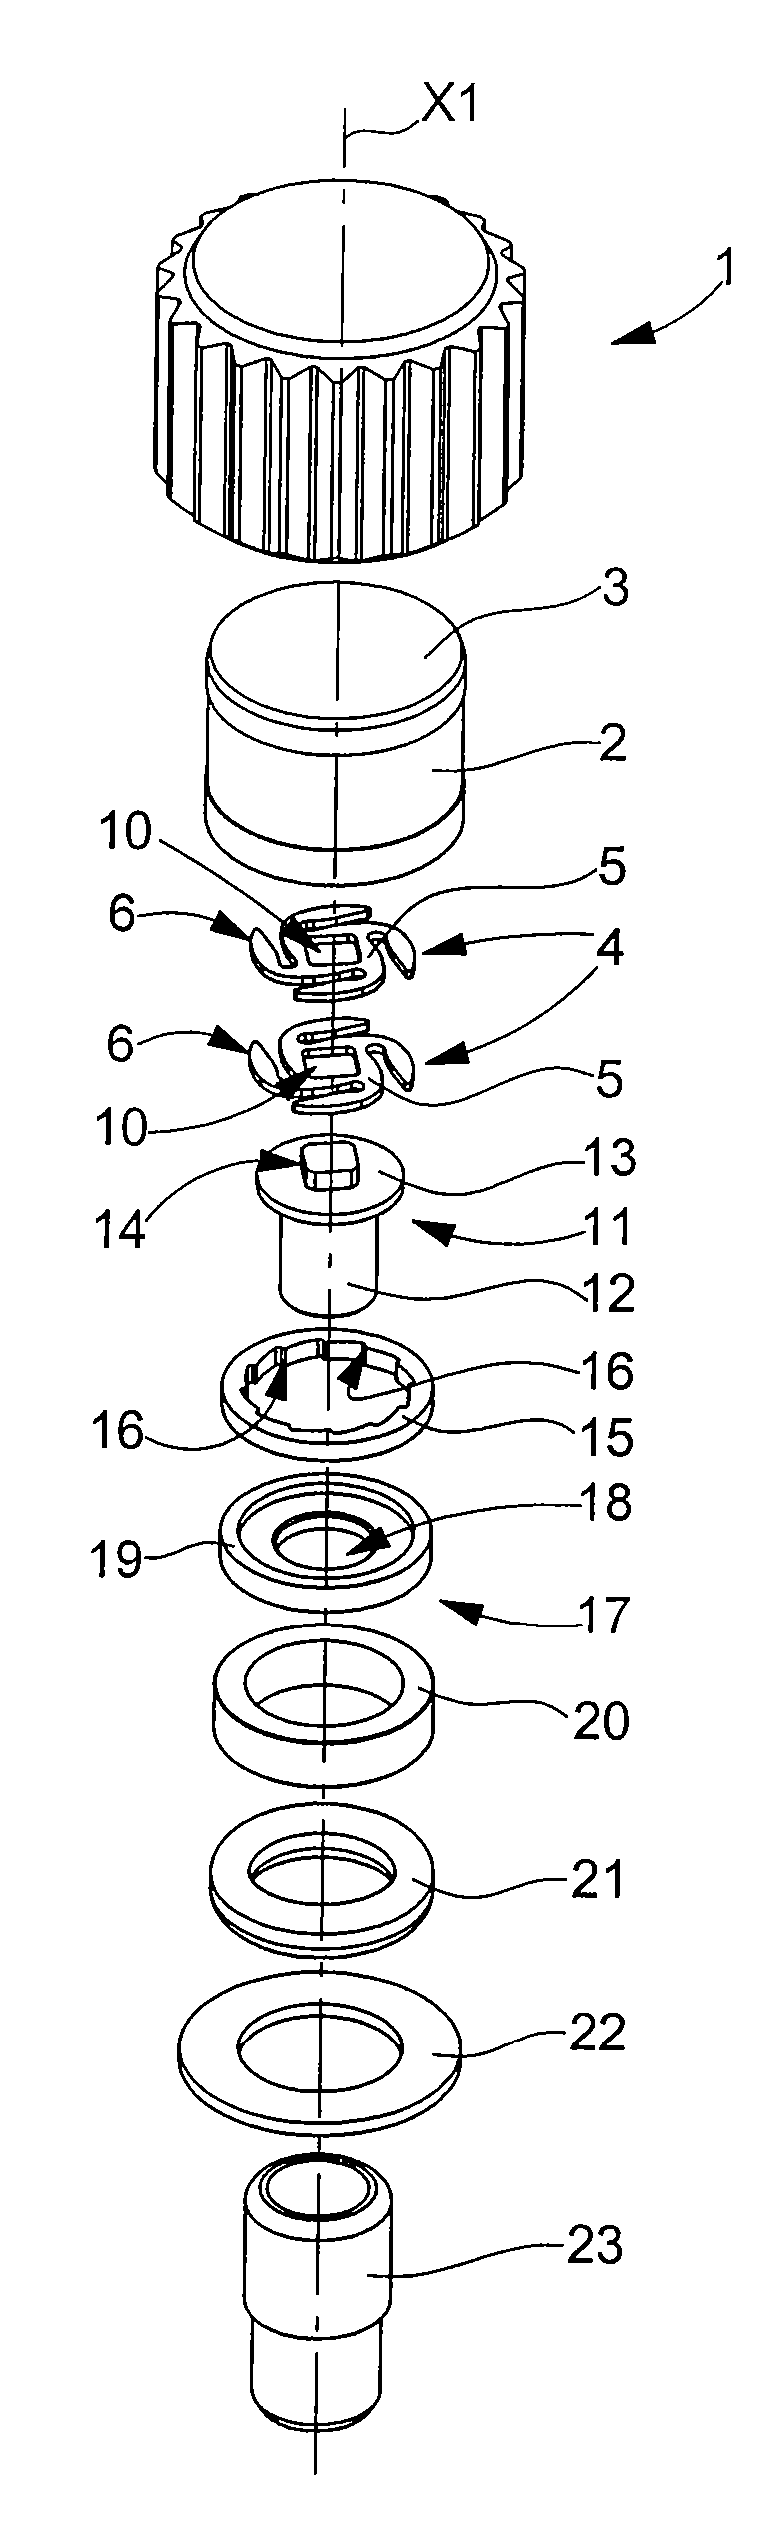 Crown for Timepiece With Disconnecting Gear Device